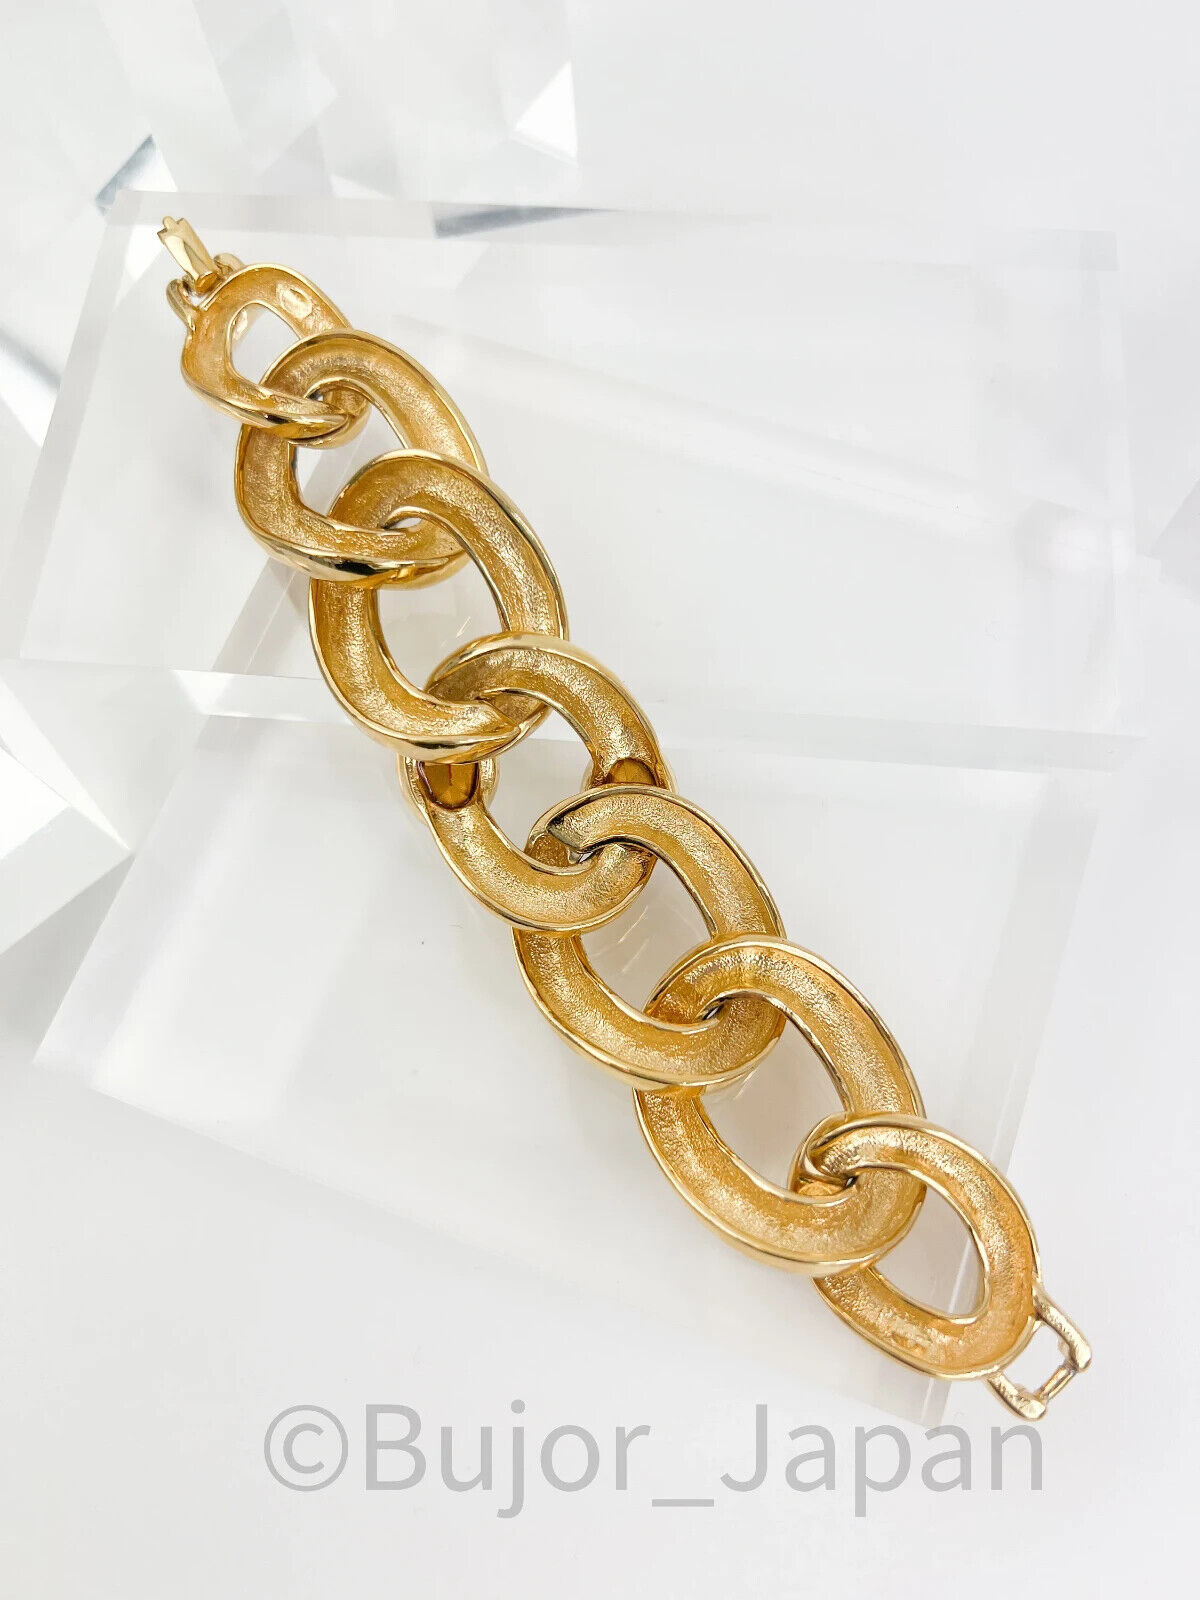 Vintage Givenchy Bracelet Givenchy  Chain Bracelet, Link Bracelet, Gold Tone Bracelet, Givenchy Vintage Jewelry, Gift for her